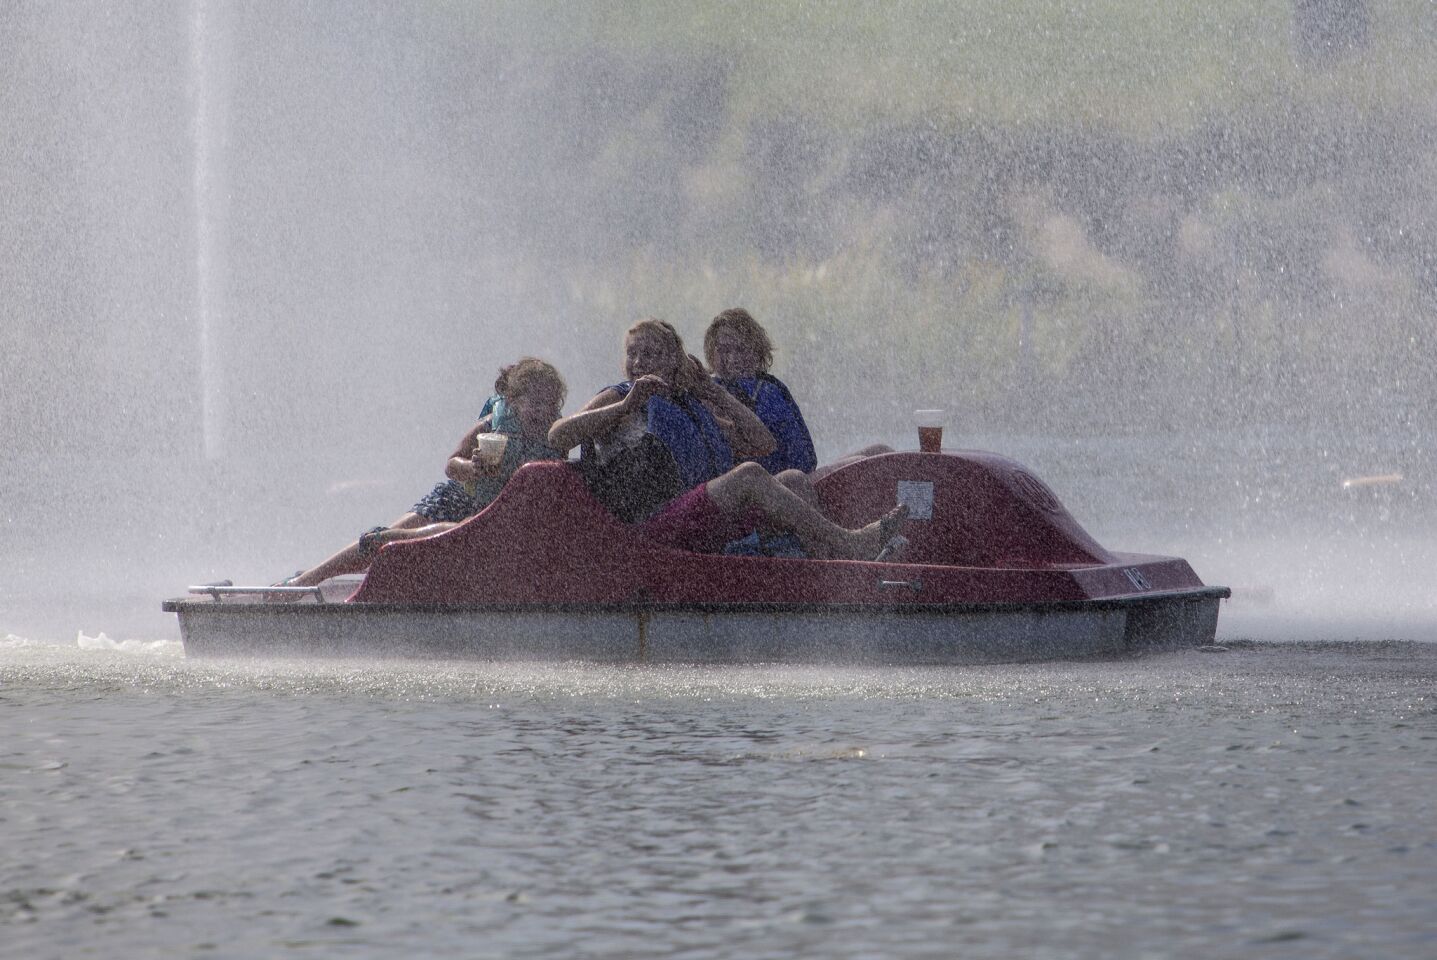 Paddle boaters enjoy the spray from the water fountain on Echo Park Lake.